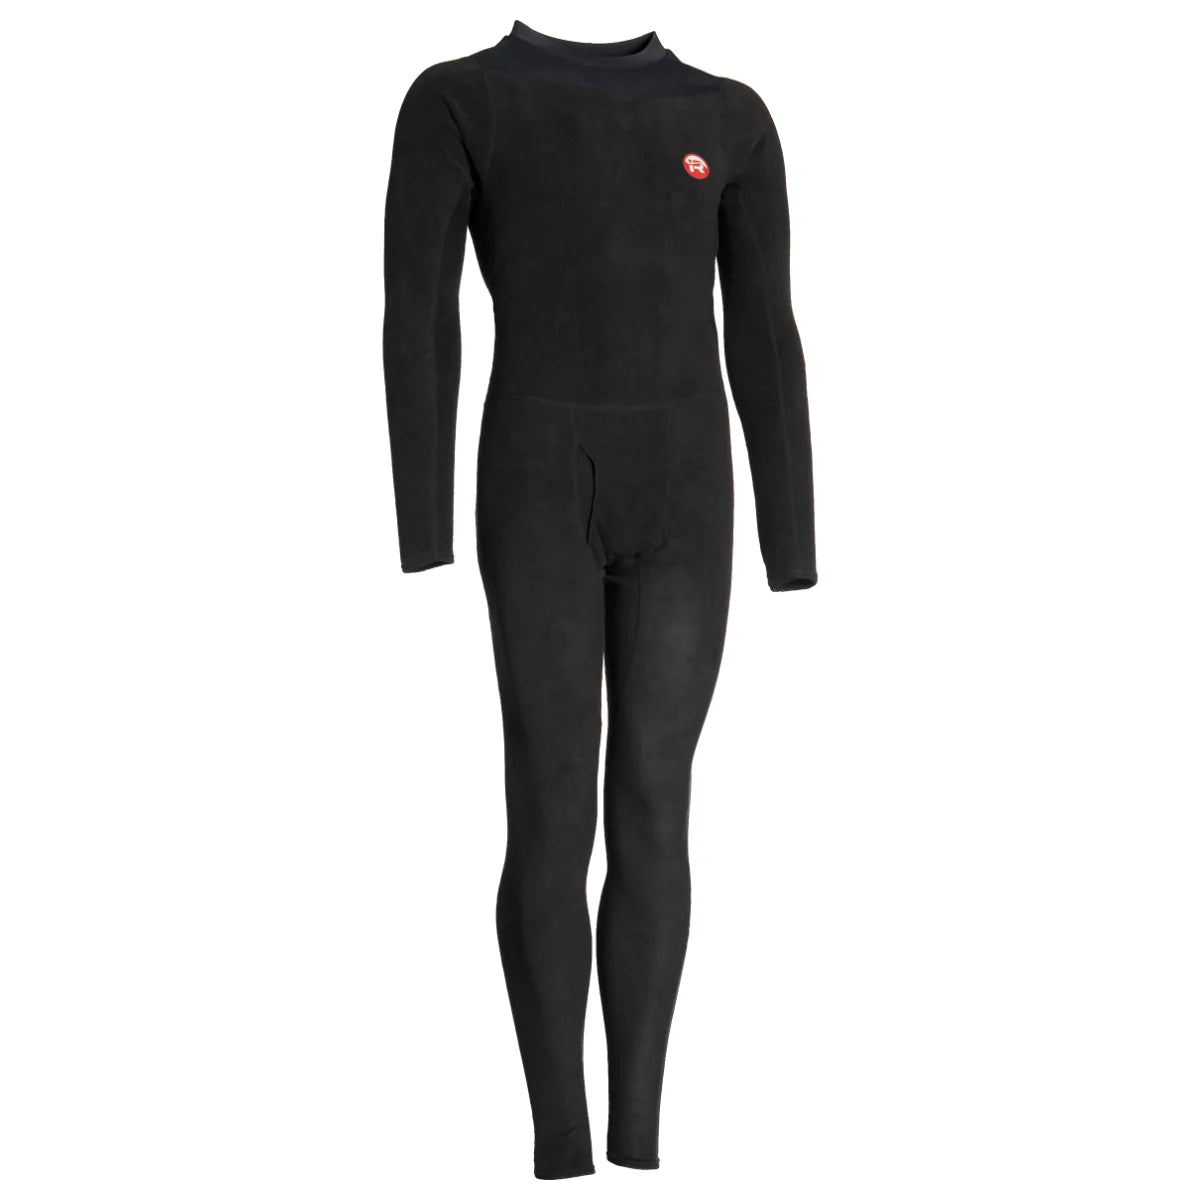 Immersion Research Men's Thick Skin Union Suit